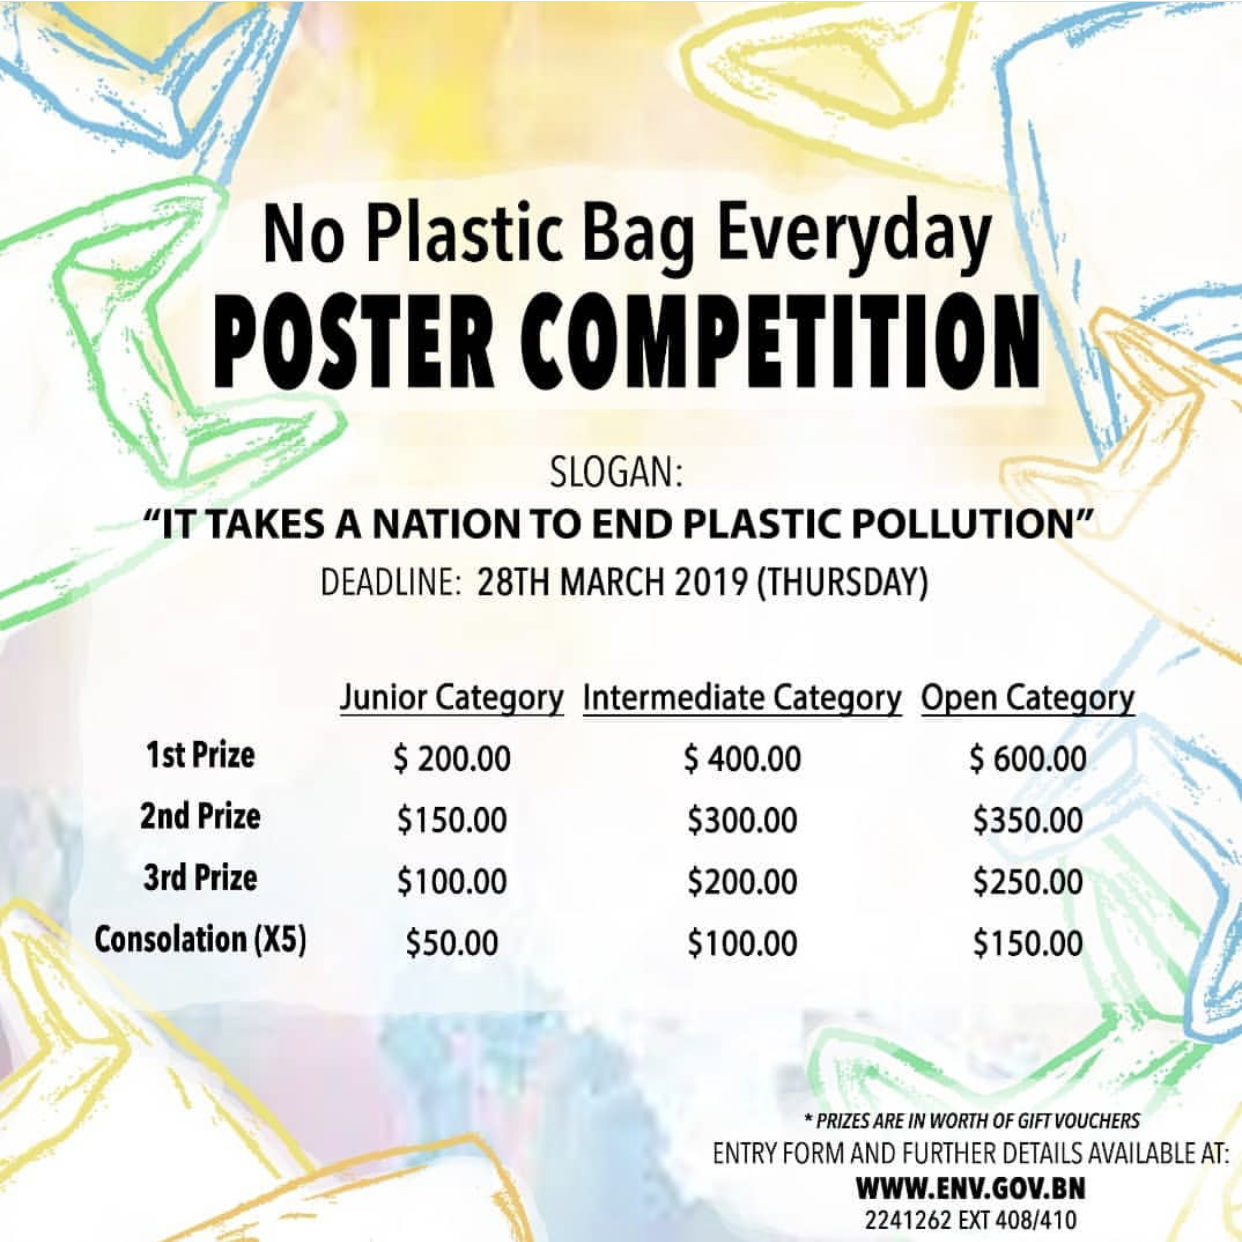 1_No Plastic Day Everyday Poster Competition.PNG